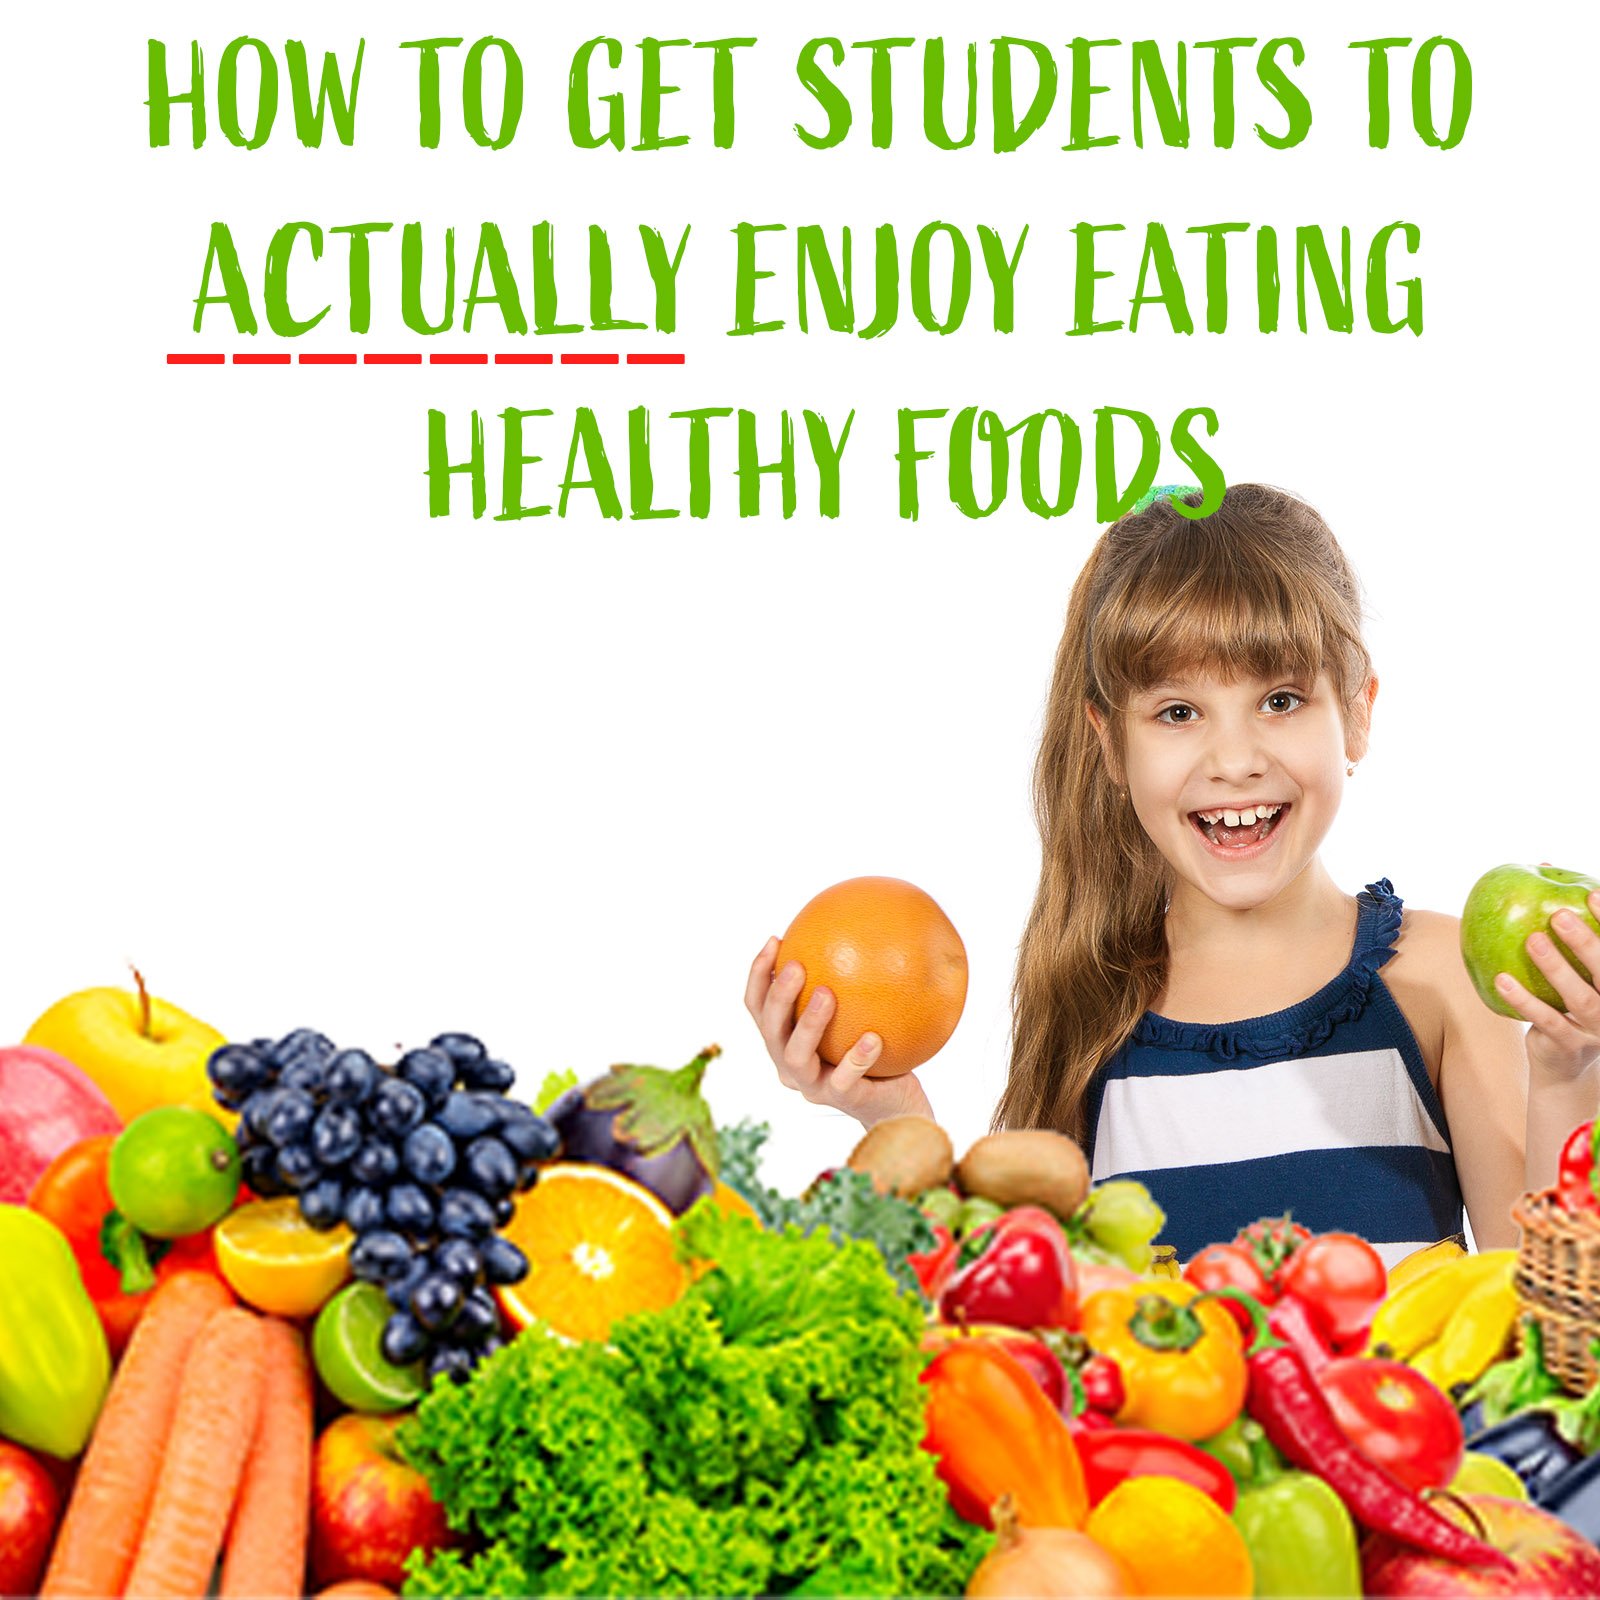 How to Get Students to Actually Enjoy Eating Healthy Foods